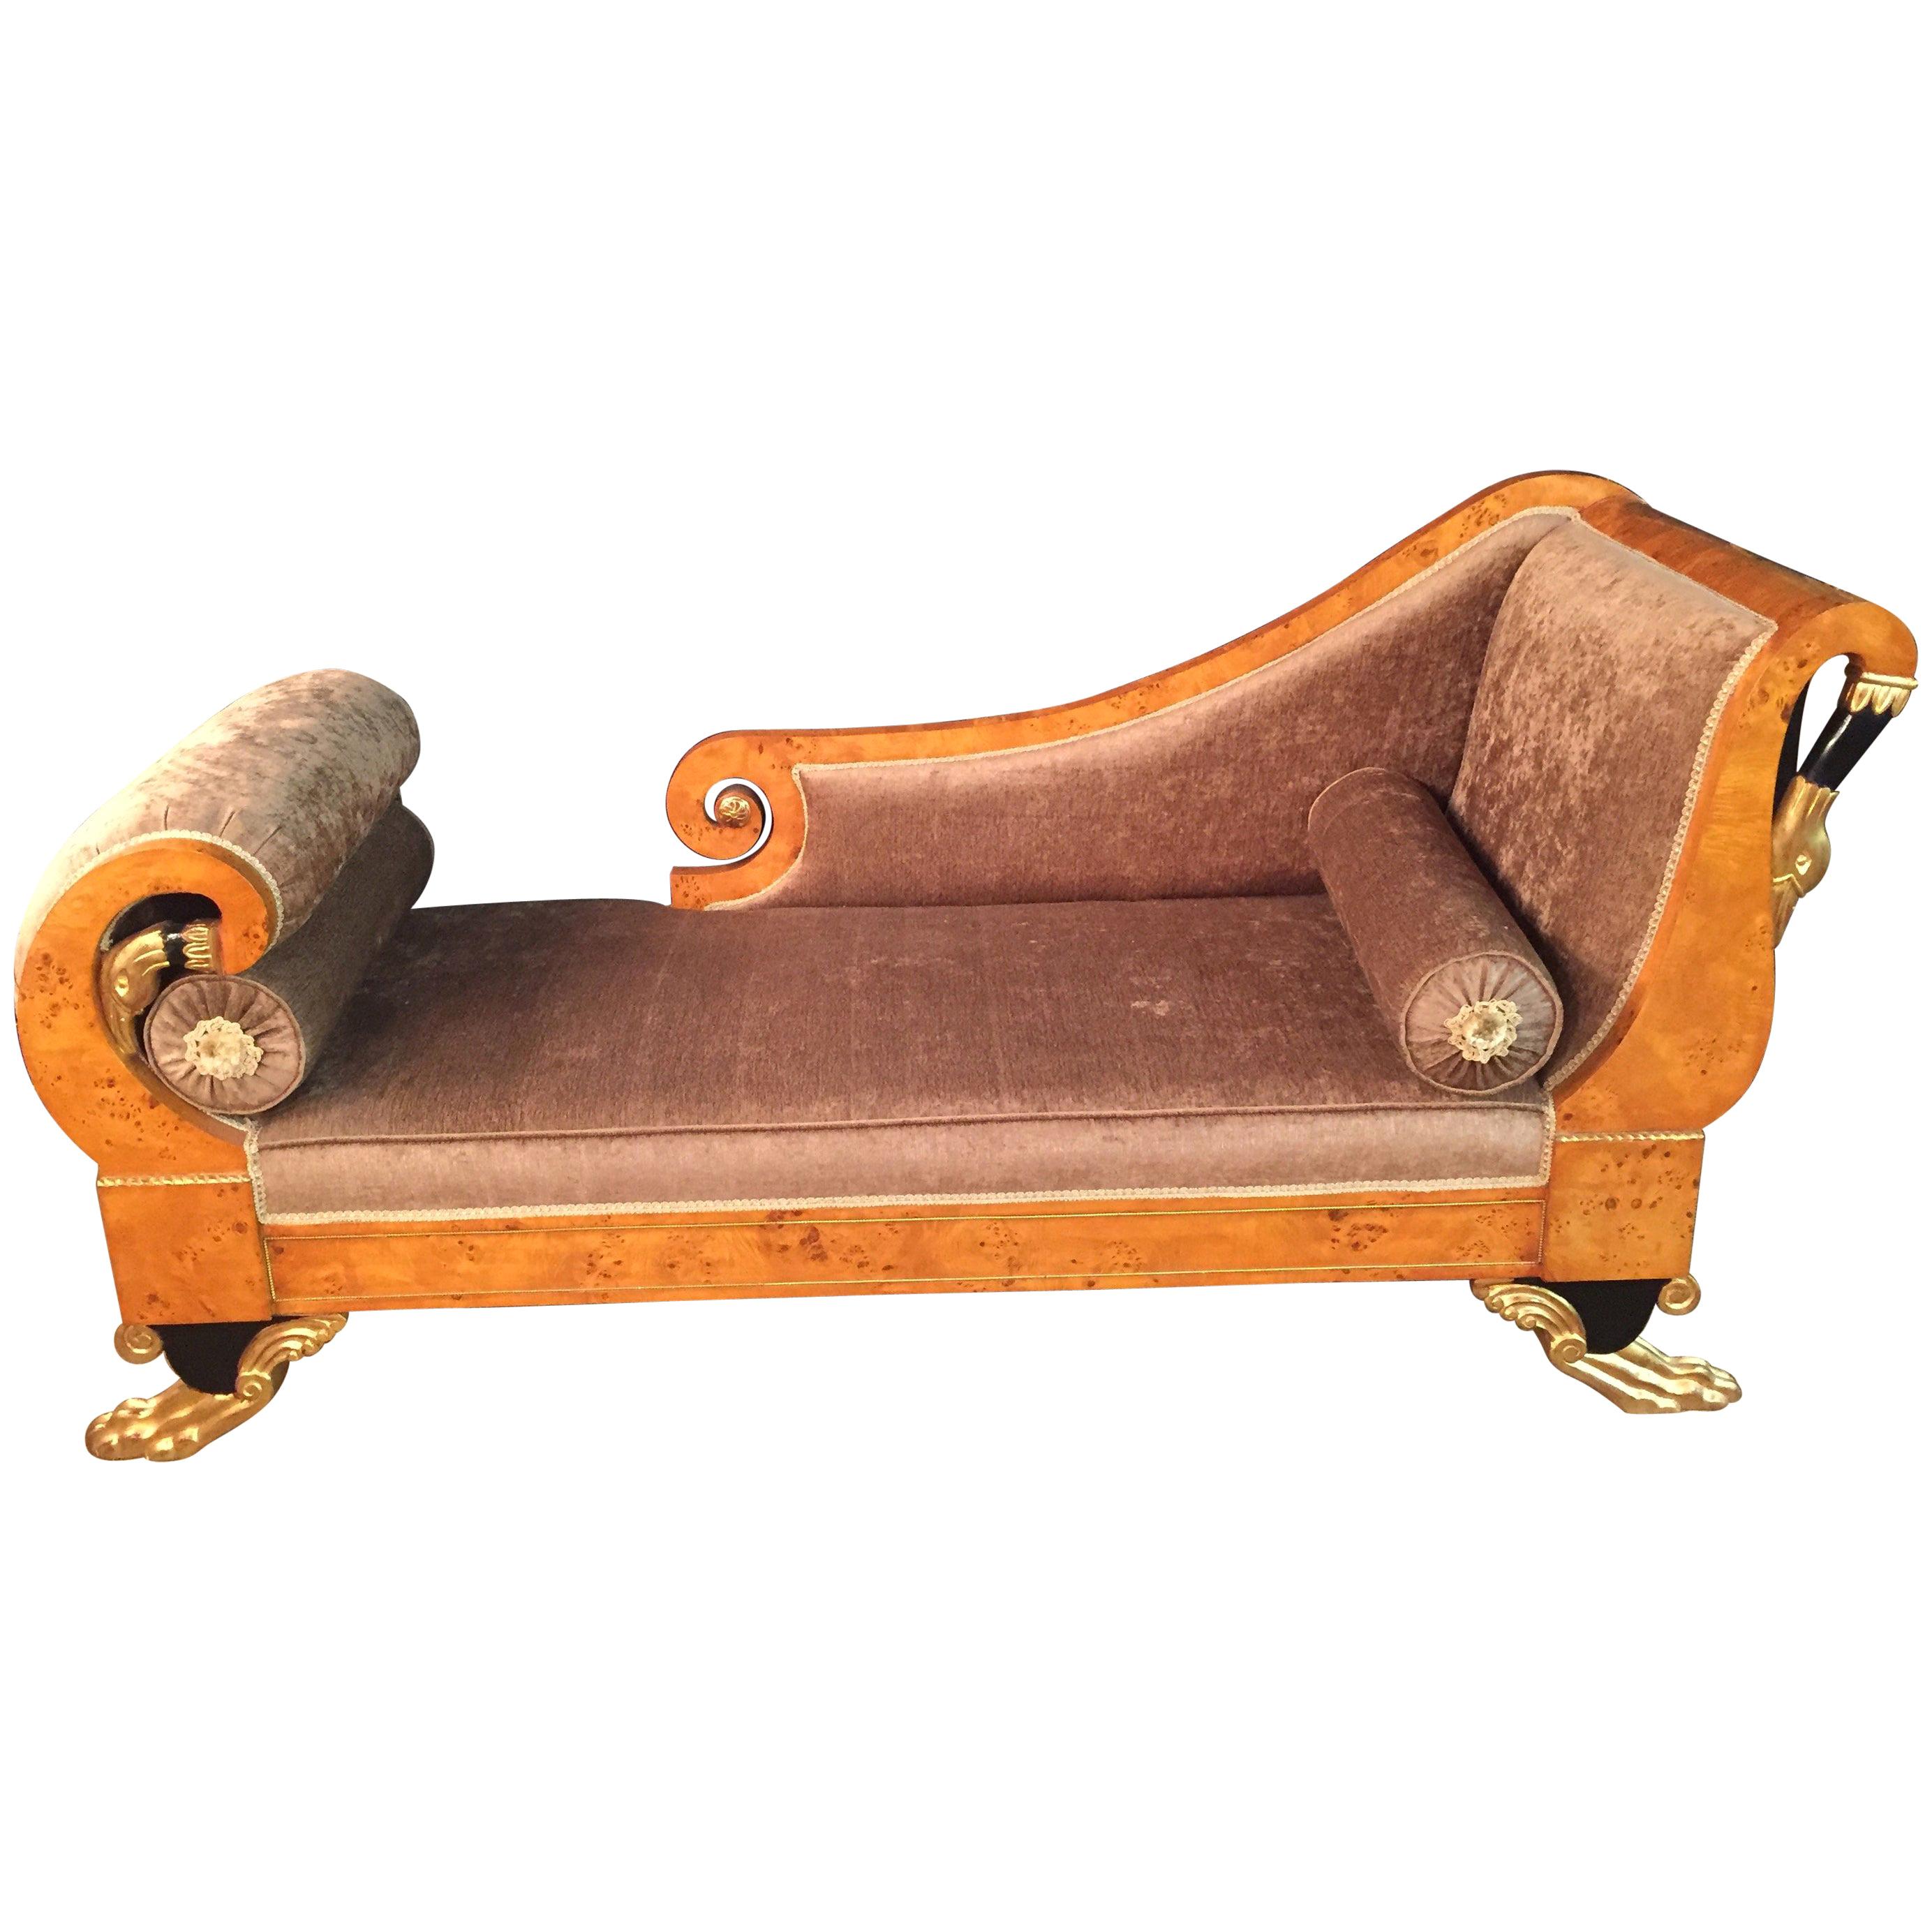 20th Century Classizim Style Empire Swan Chaise Lounge